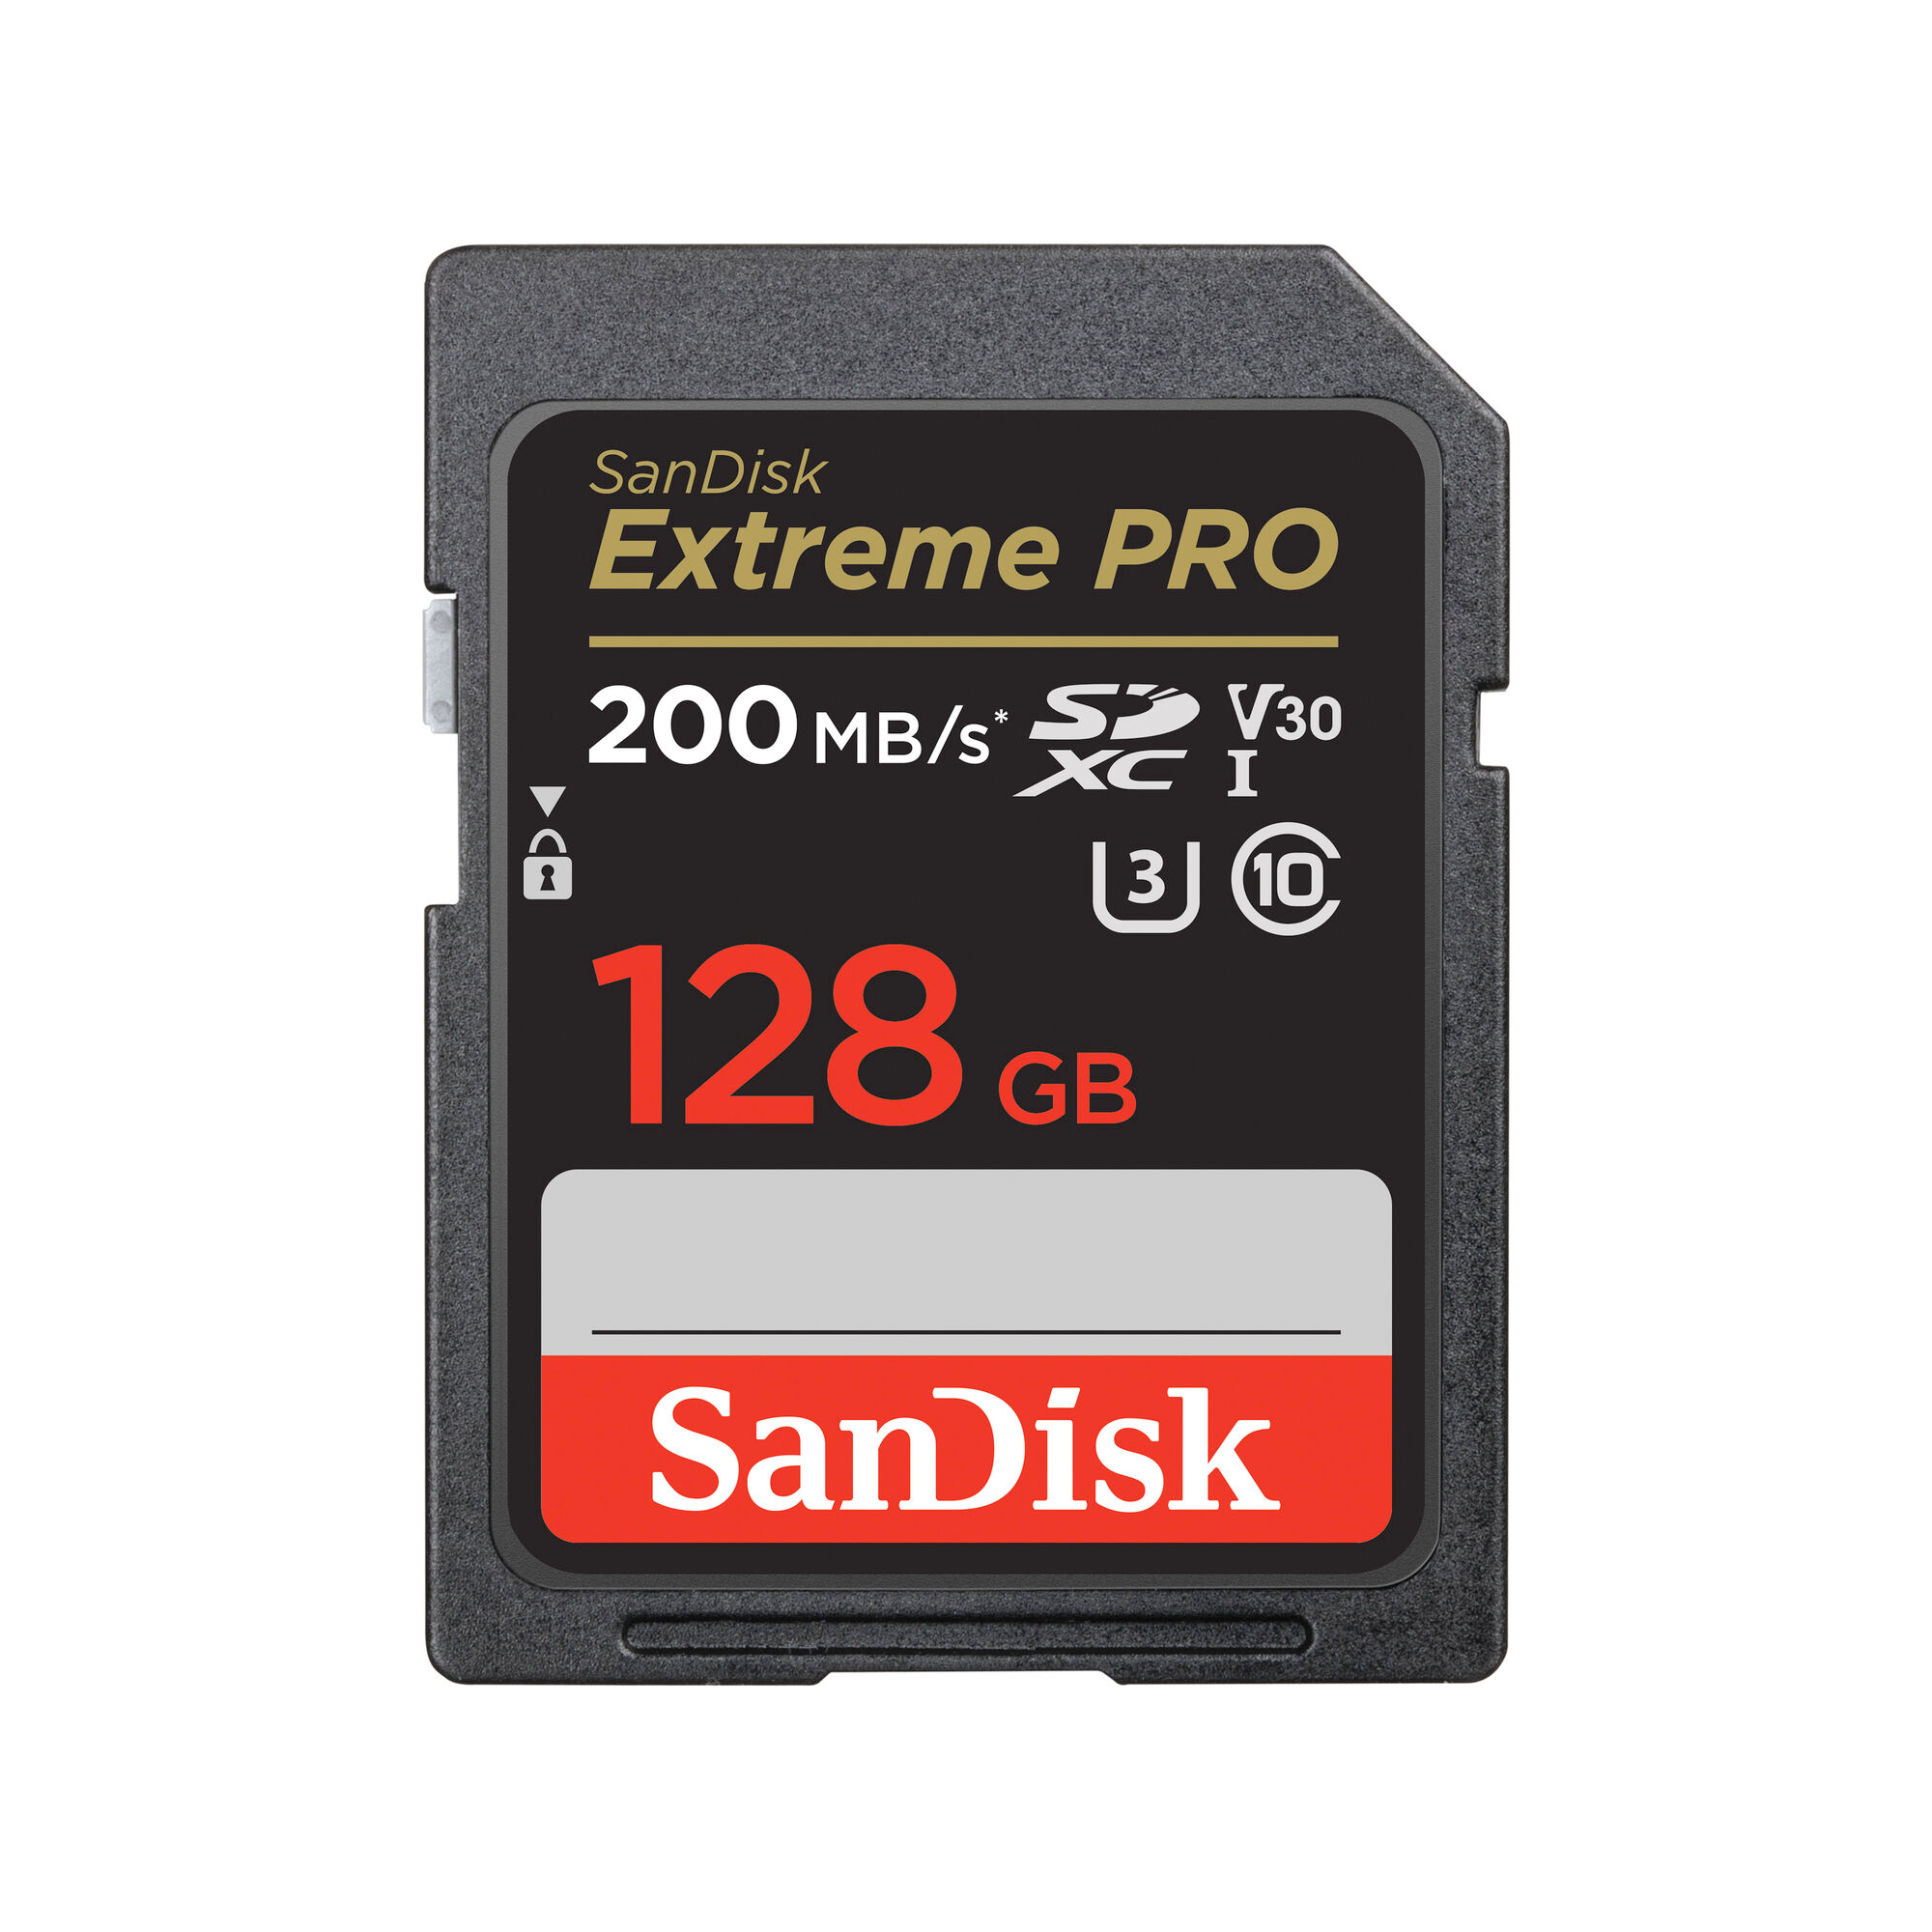 SanDisk Extreme PRO SD UHS I 128GB Card for 4K Video 200MB/s Read & 140MB/s Write